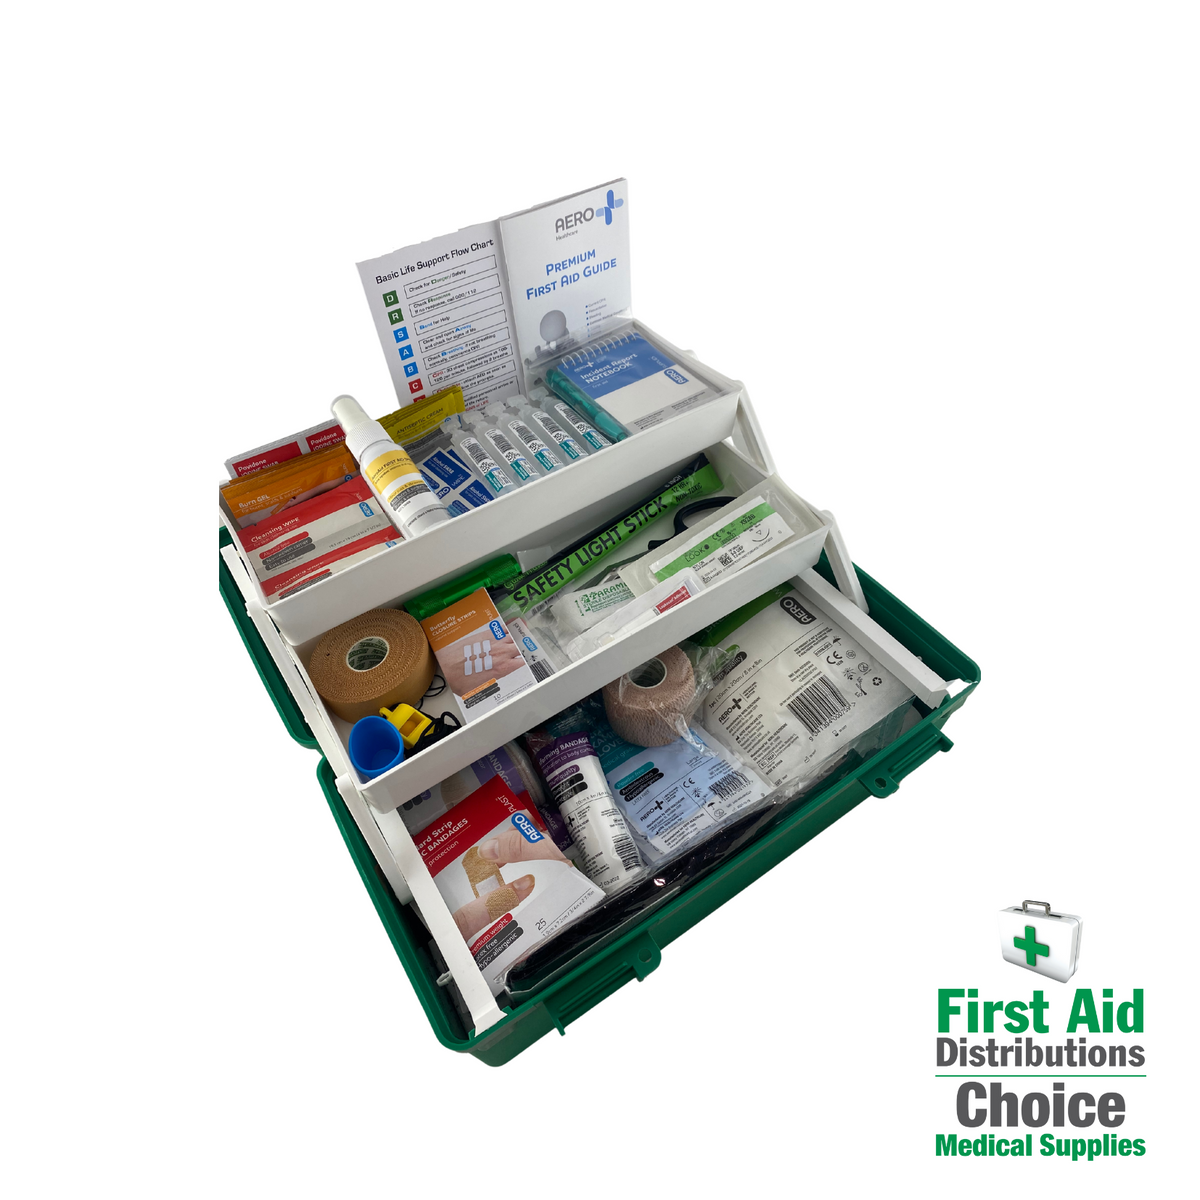 First Aid Kit - Adventurer Outdoors | First Aid Distributions